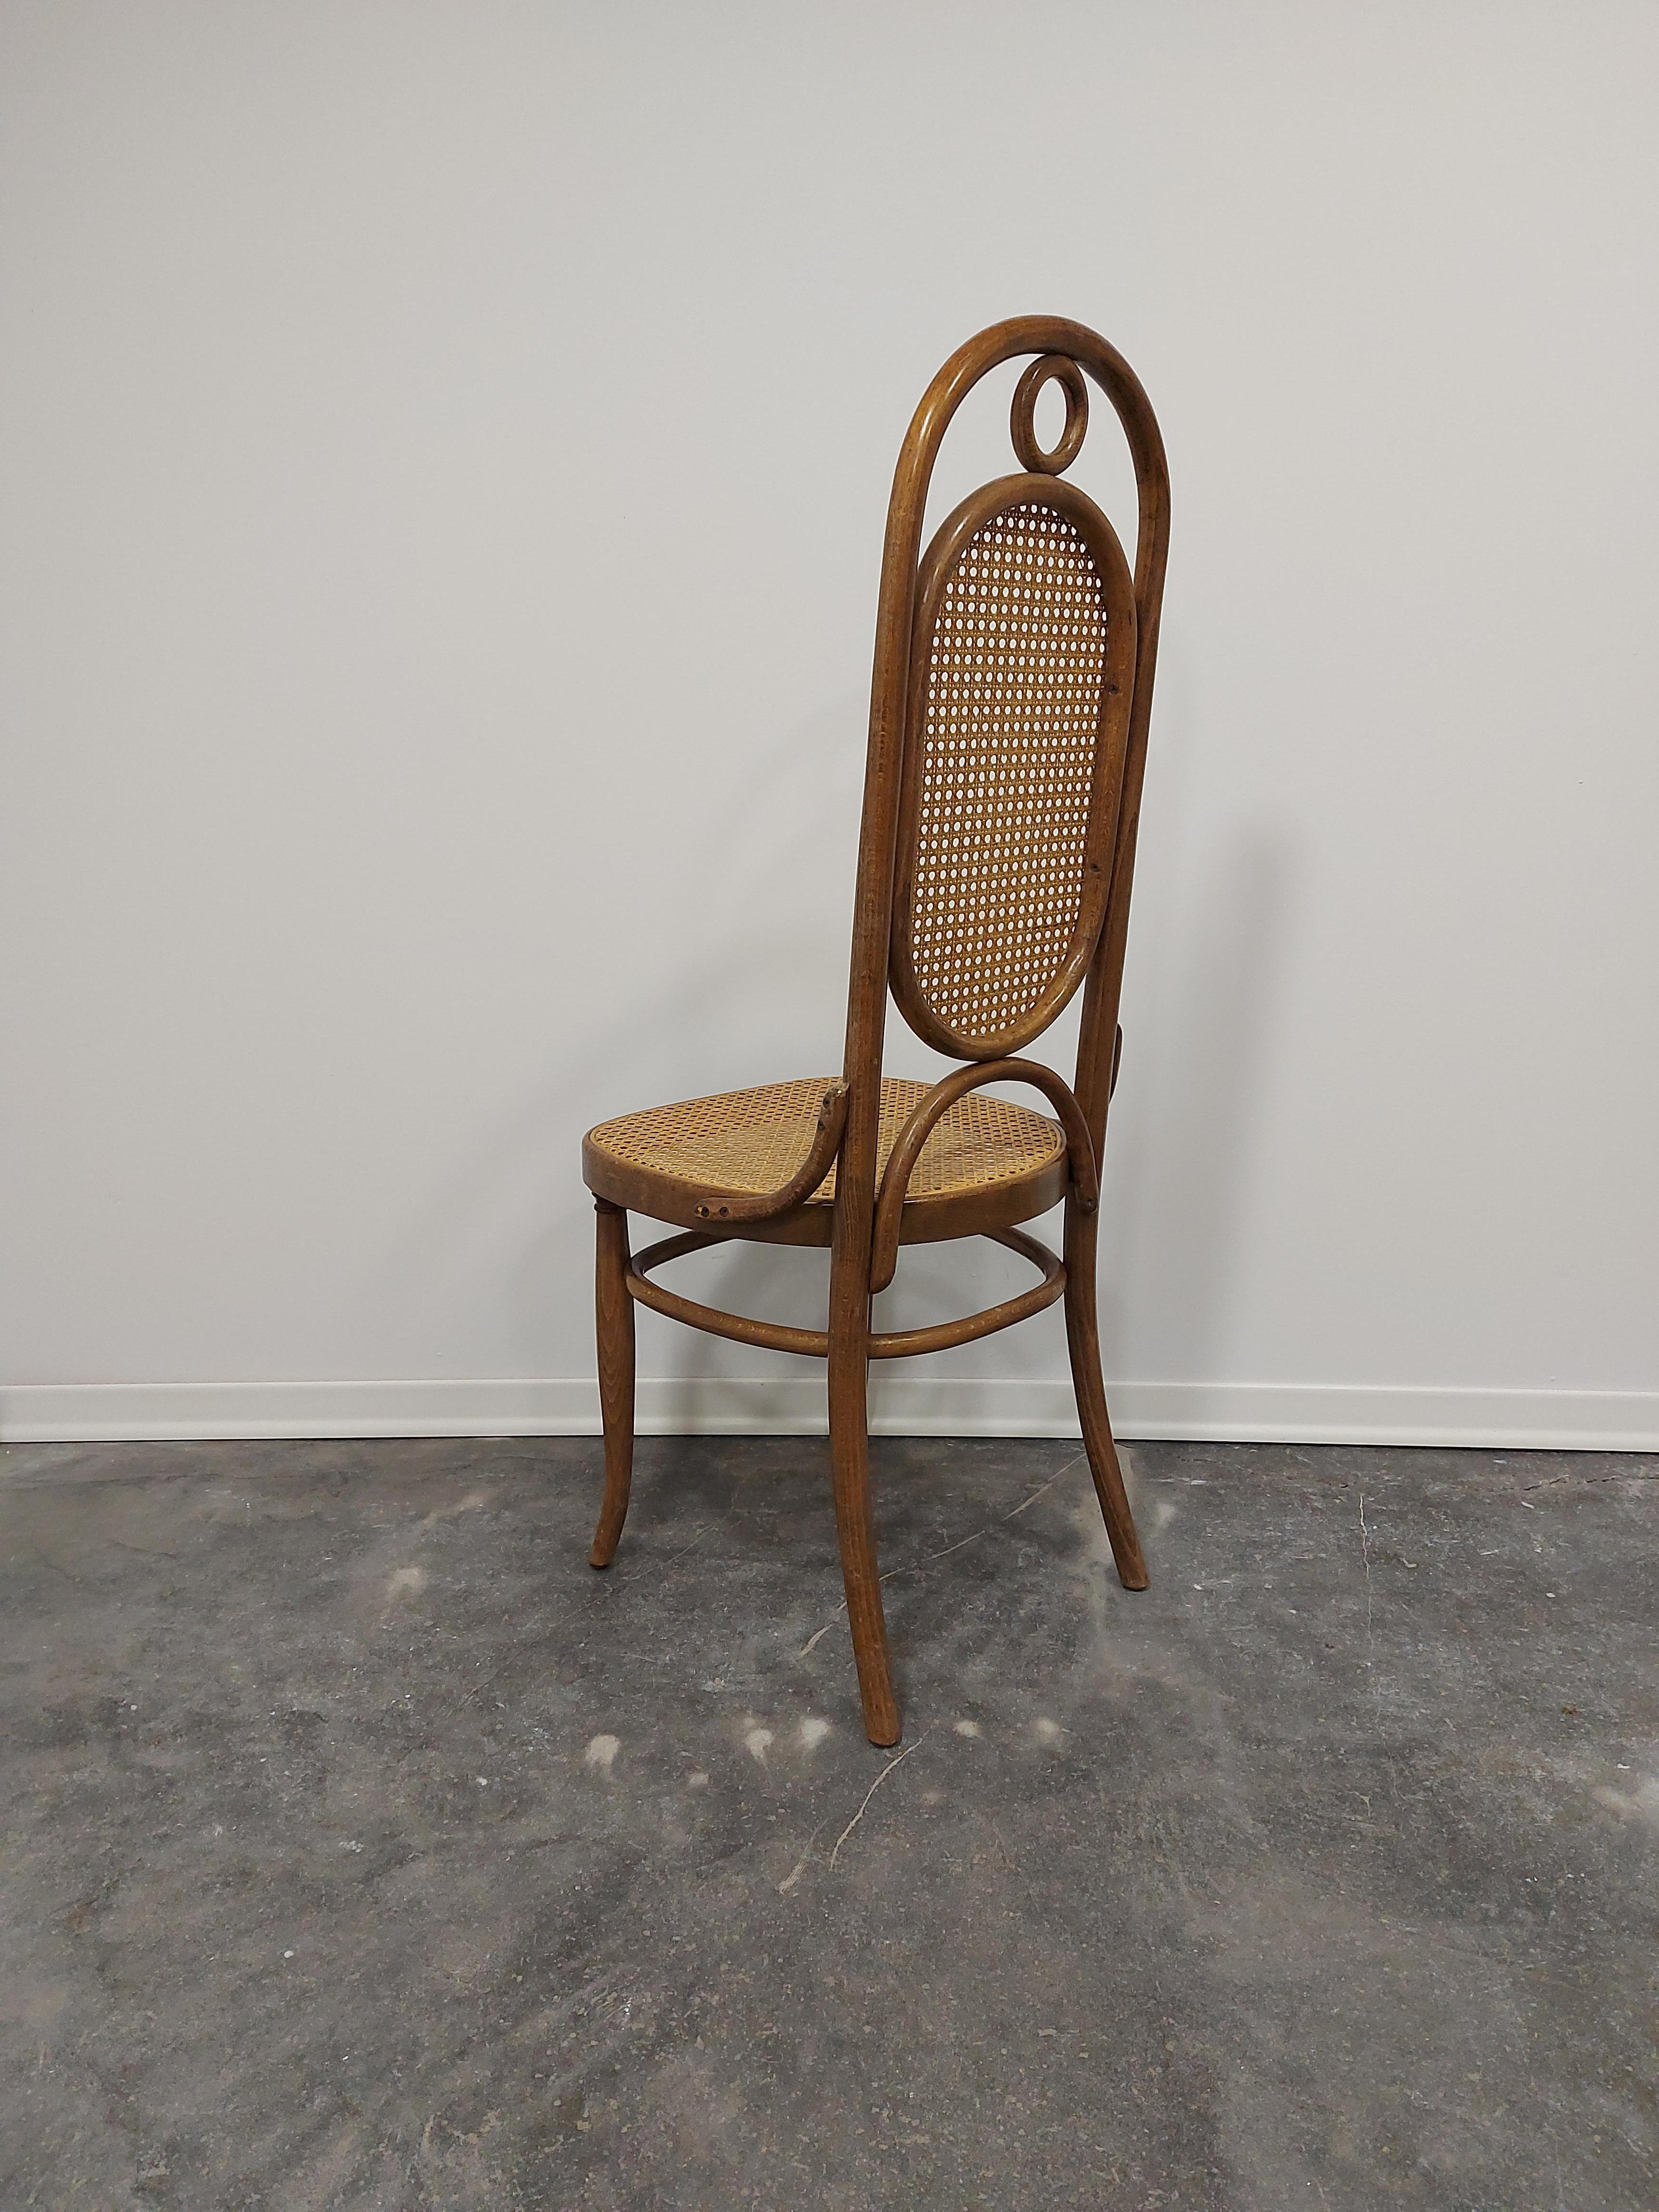 Mid-20th Century Dining Chairs, Bentwood, M 17, High Back, 1 of 6 For Sale